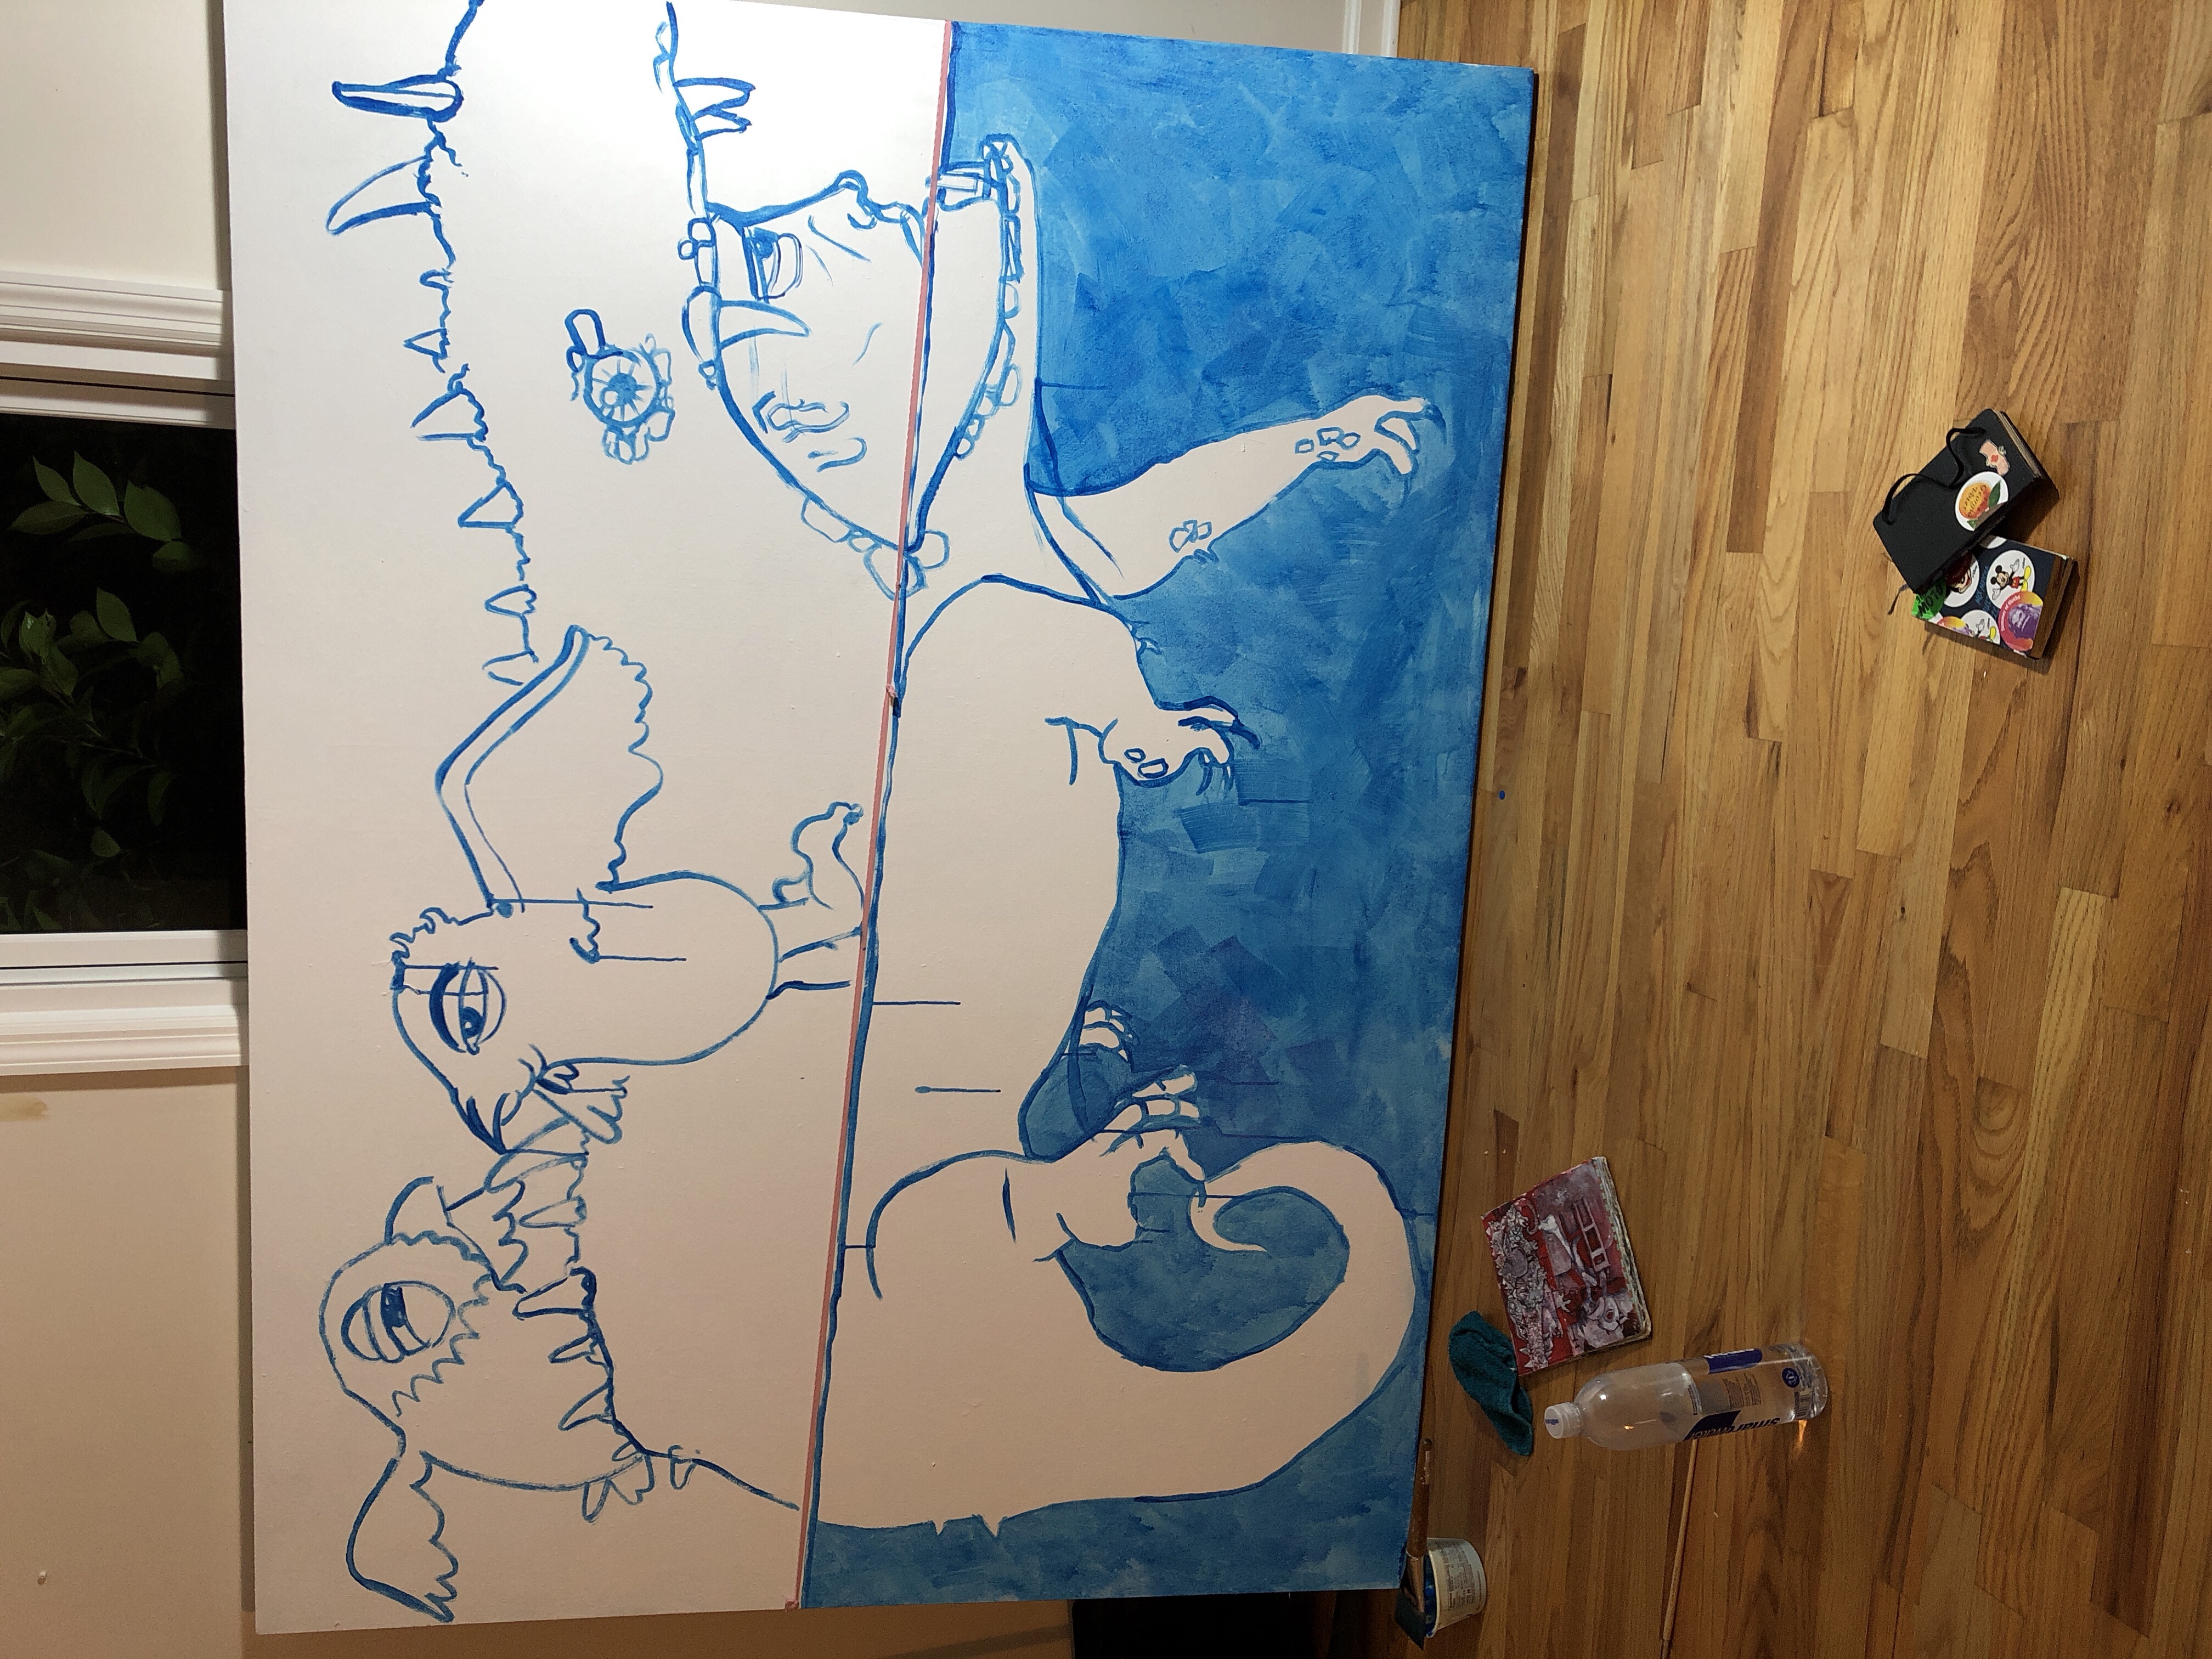 A 60 by 80 inch cavas in a room. the painting is in progress, an outline of a water beast with cartoon crows flying about.